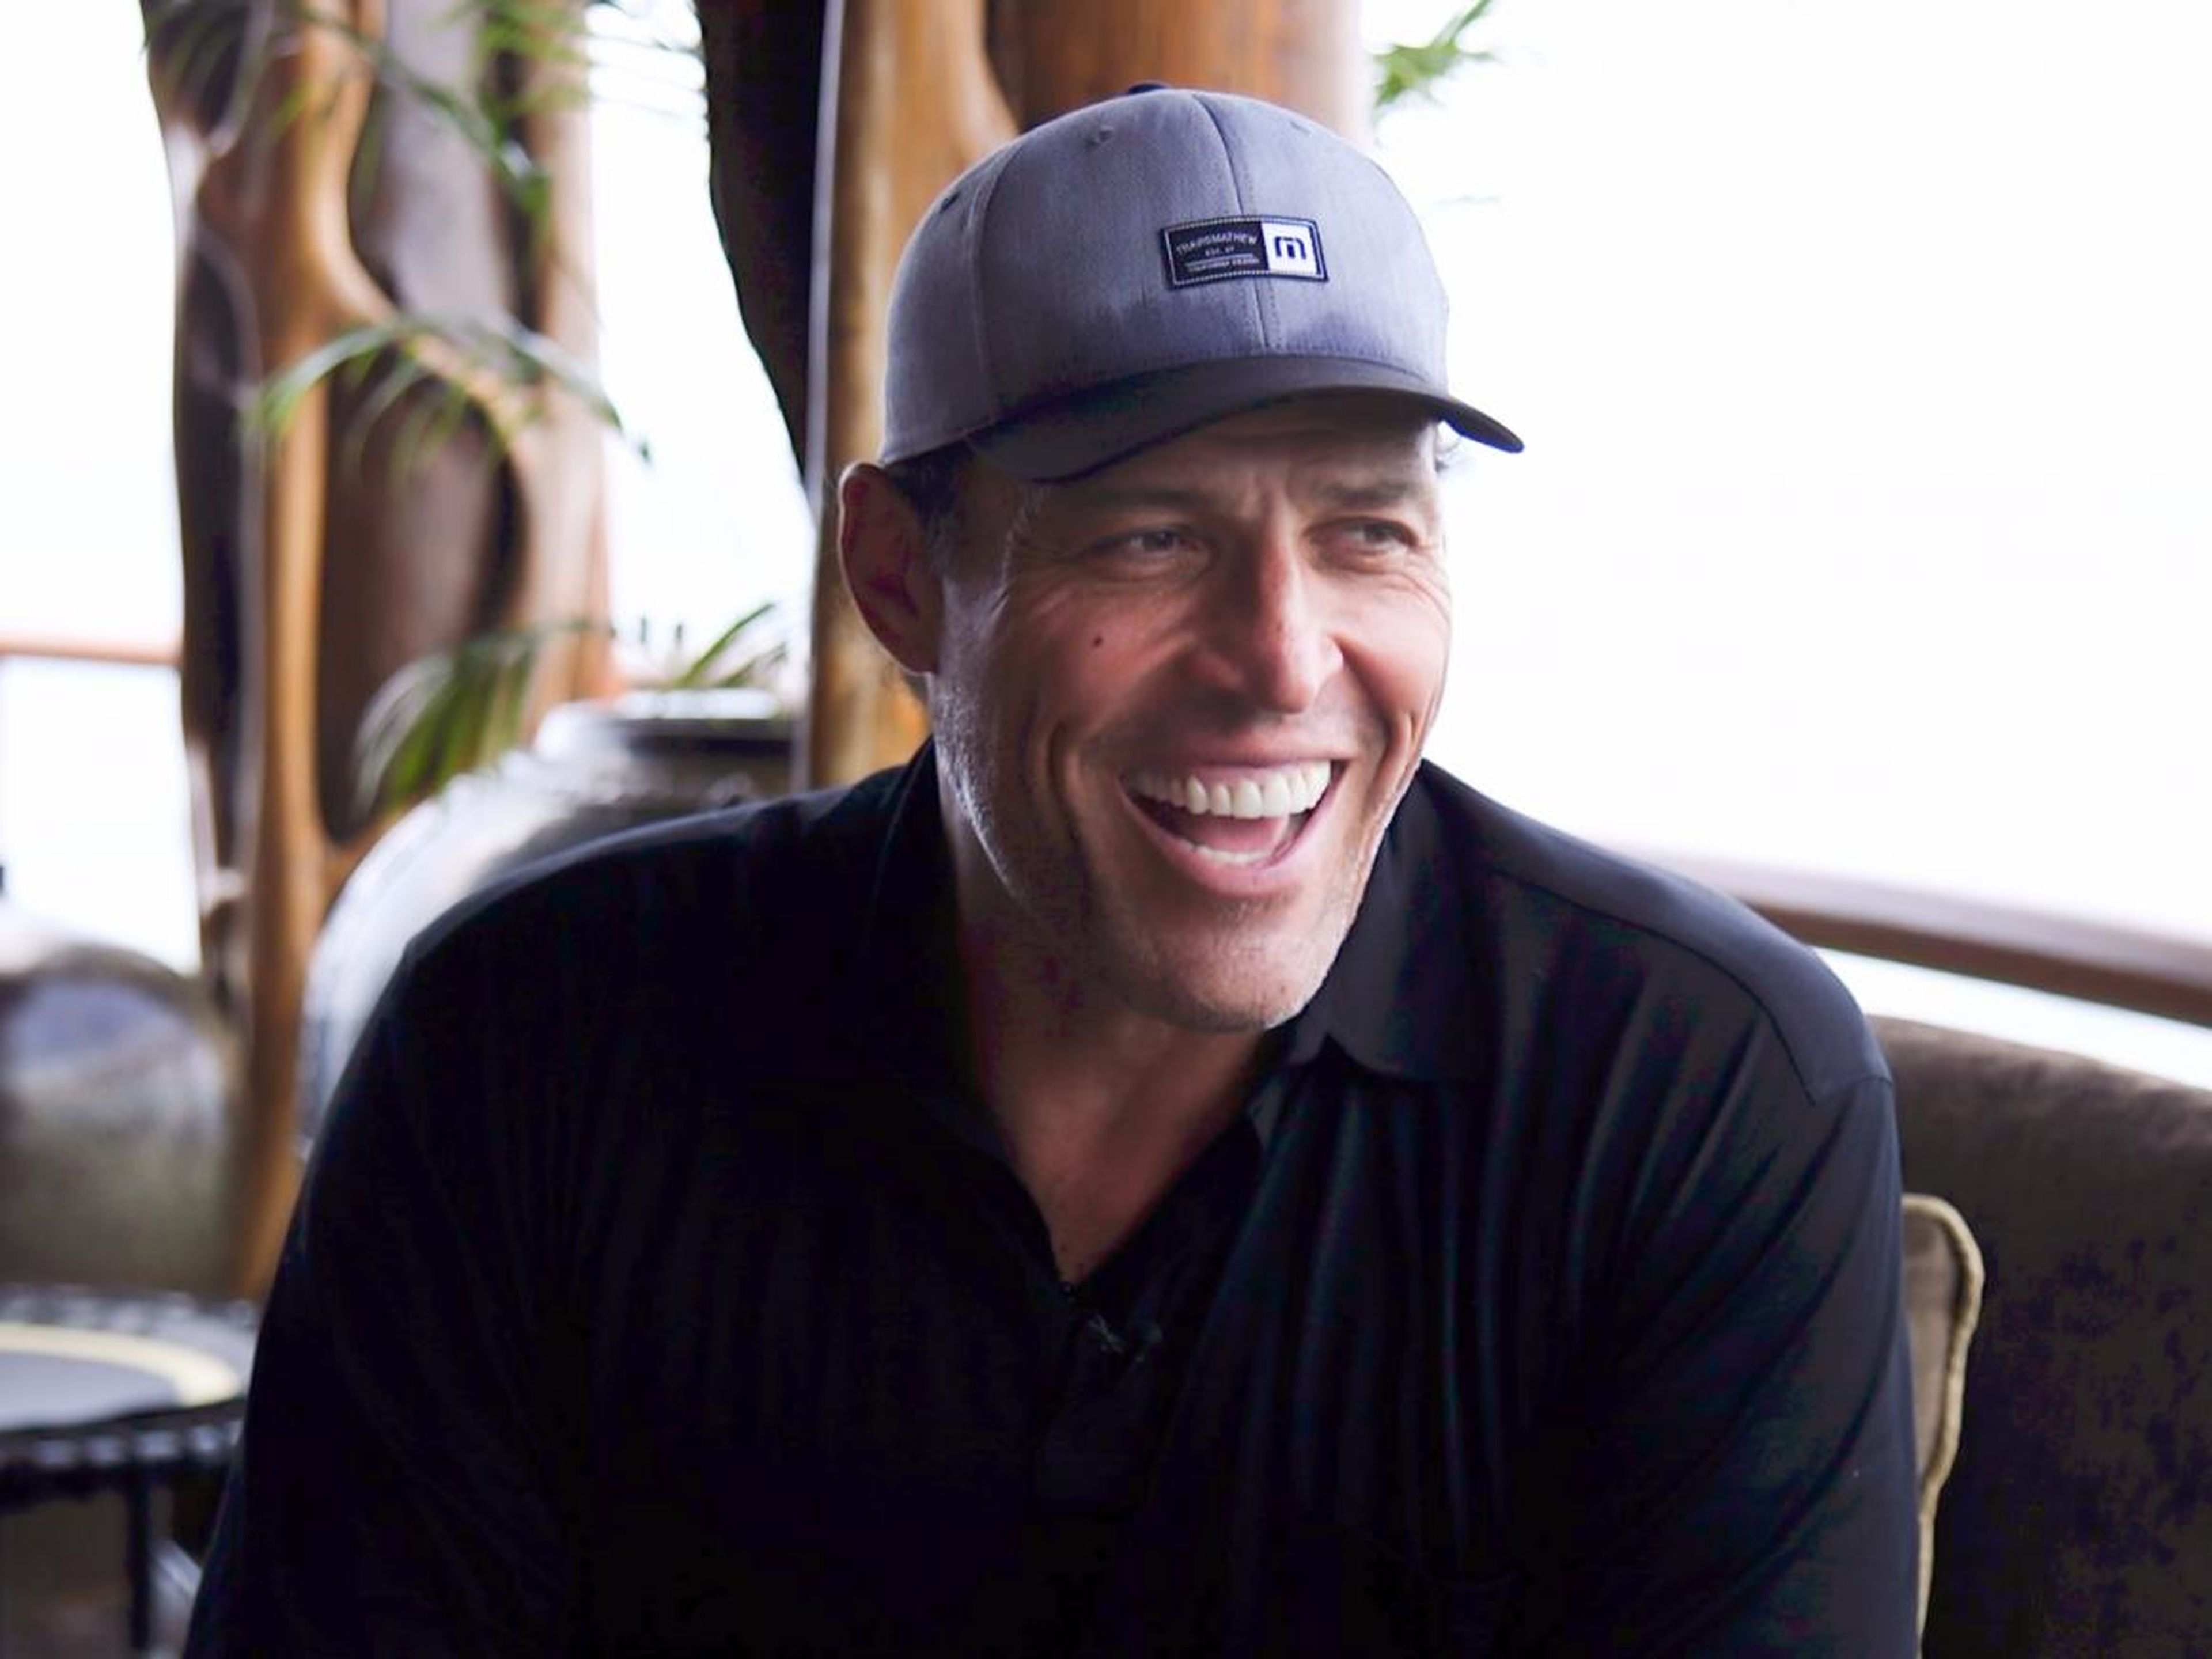 Likewise, life coach Tony Robbins typically gets about three to five hours of sleep.